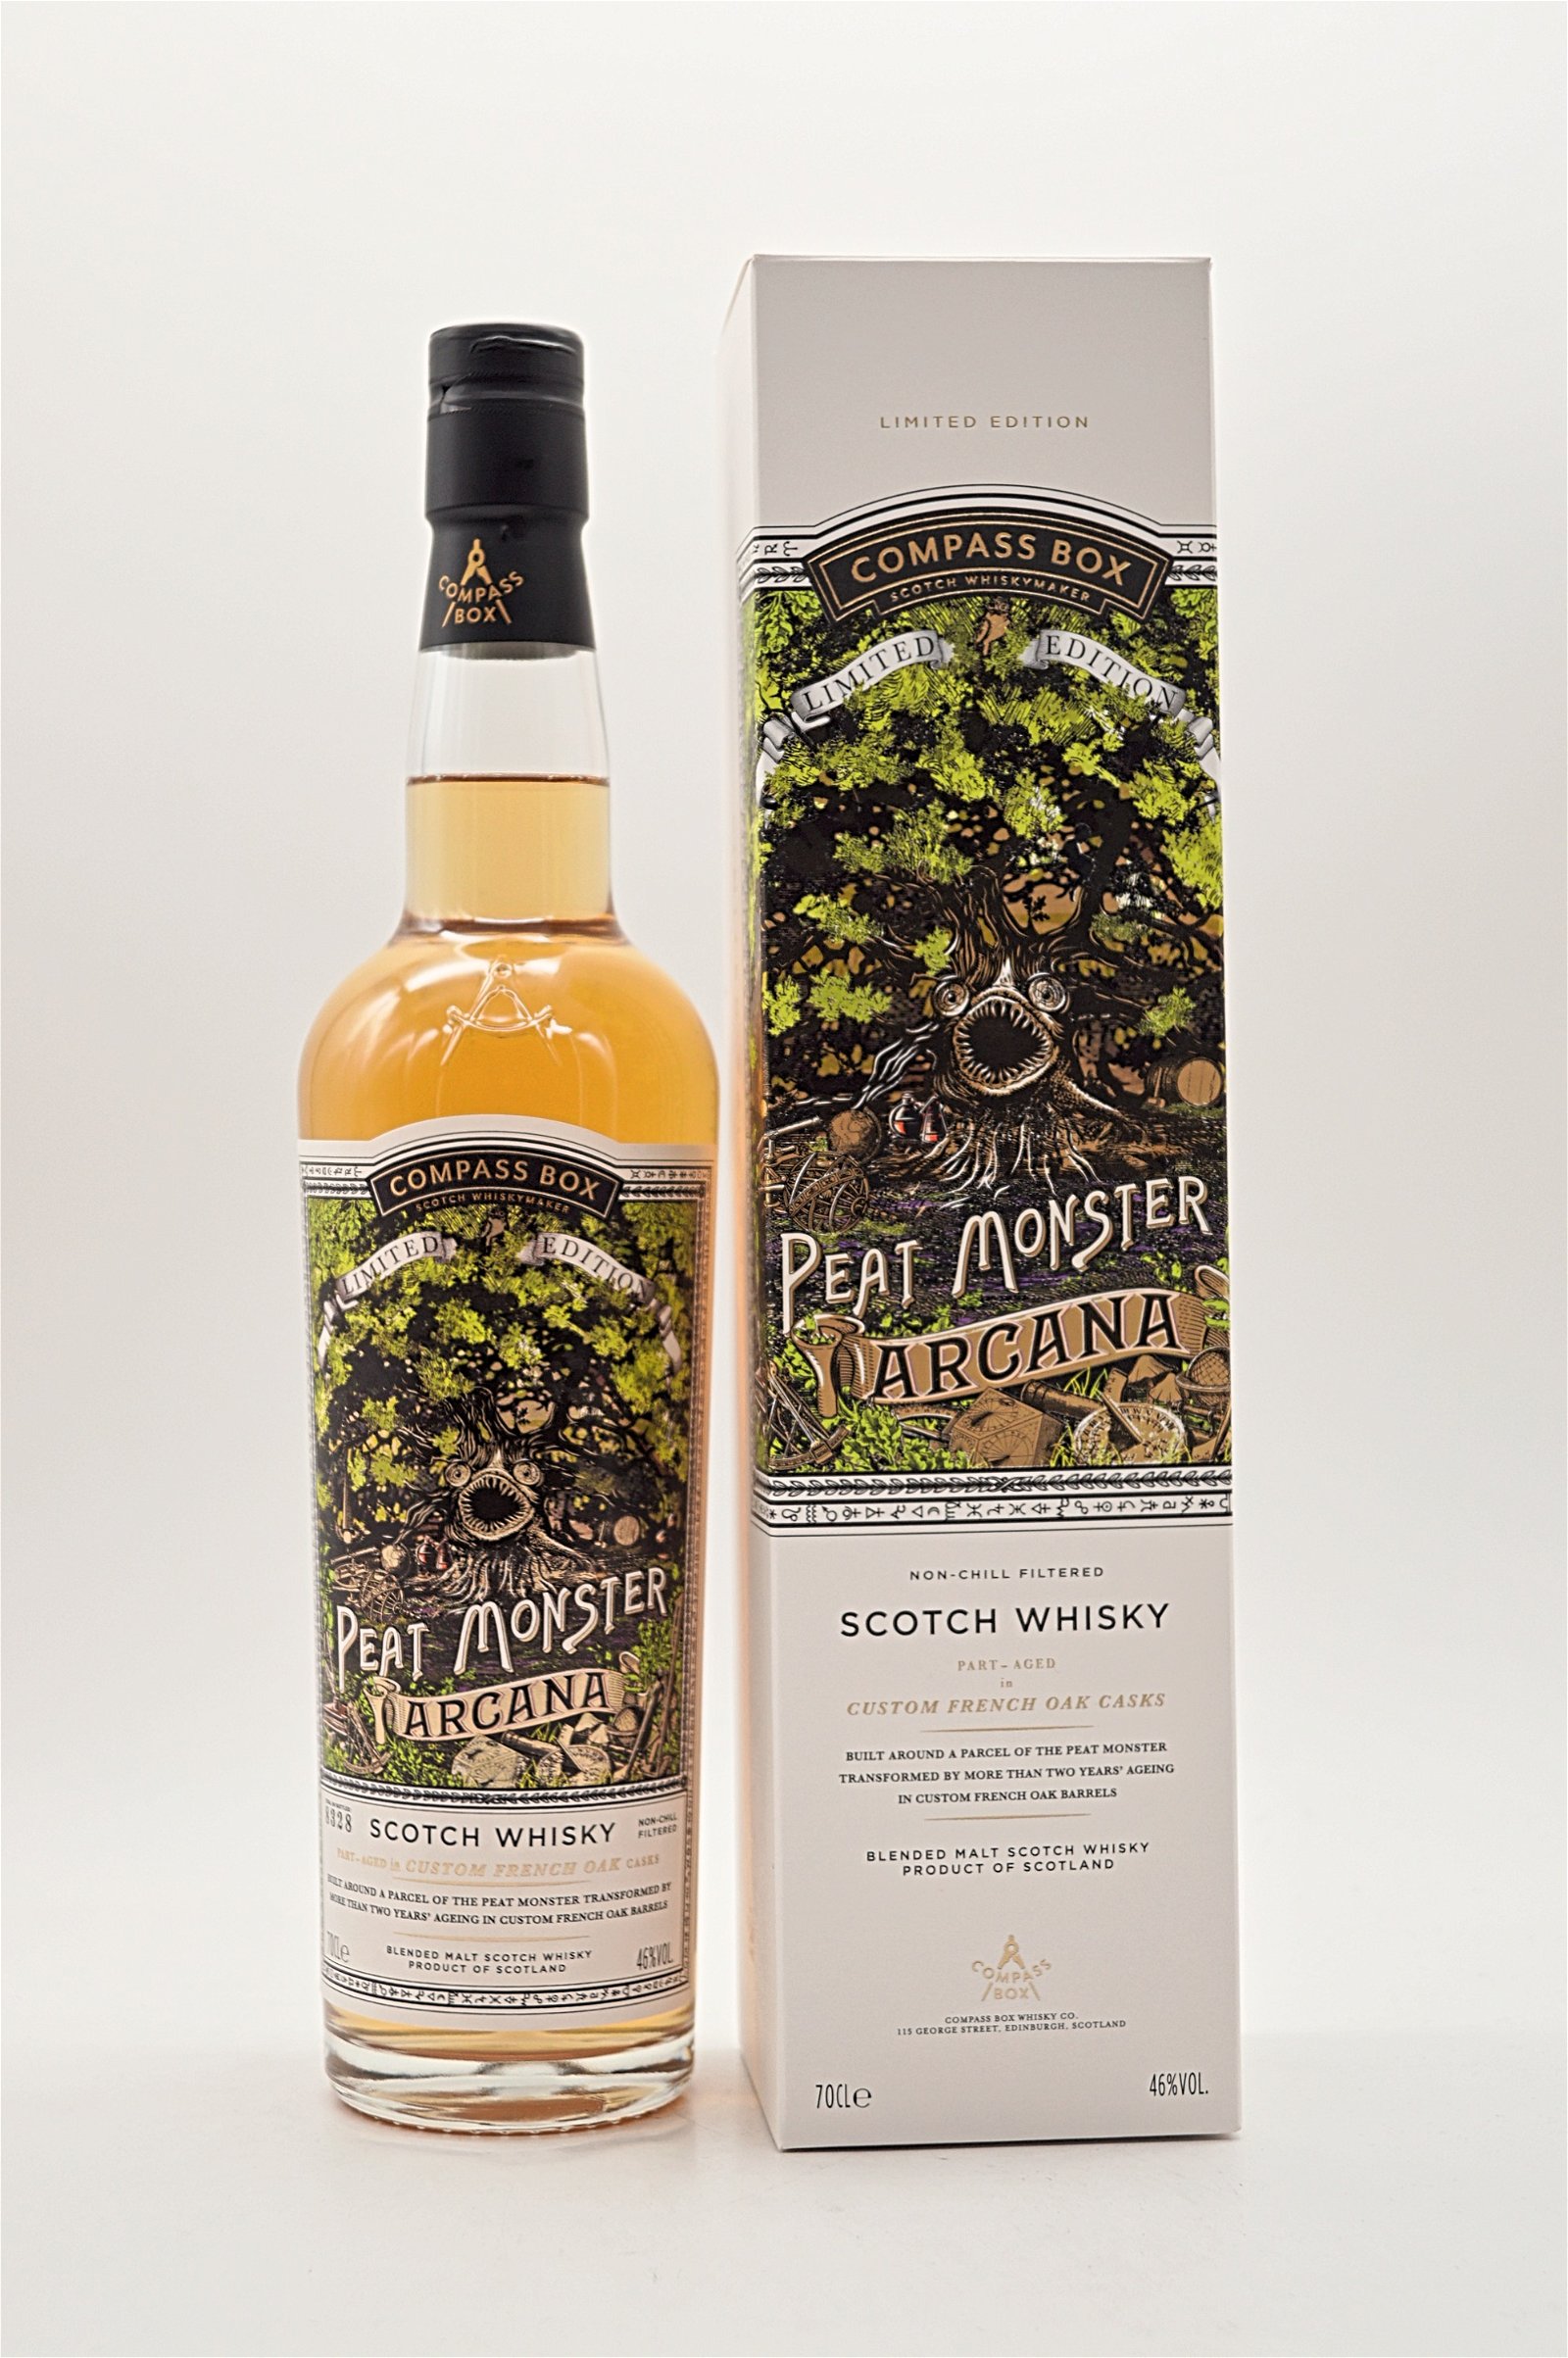 Compass Box The Peat Monster Arcana Limited Edition Blended Malt Scotch Whisky